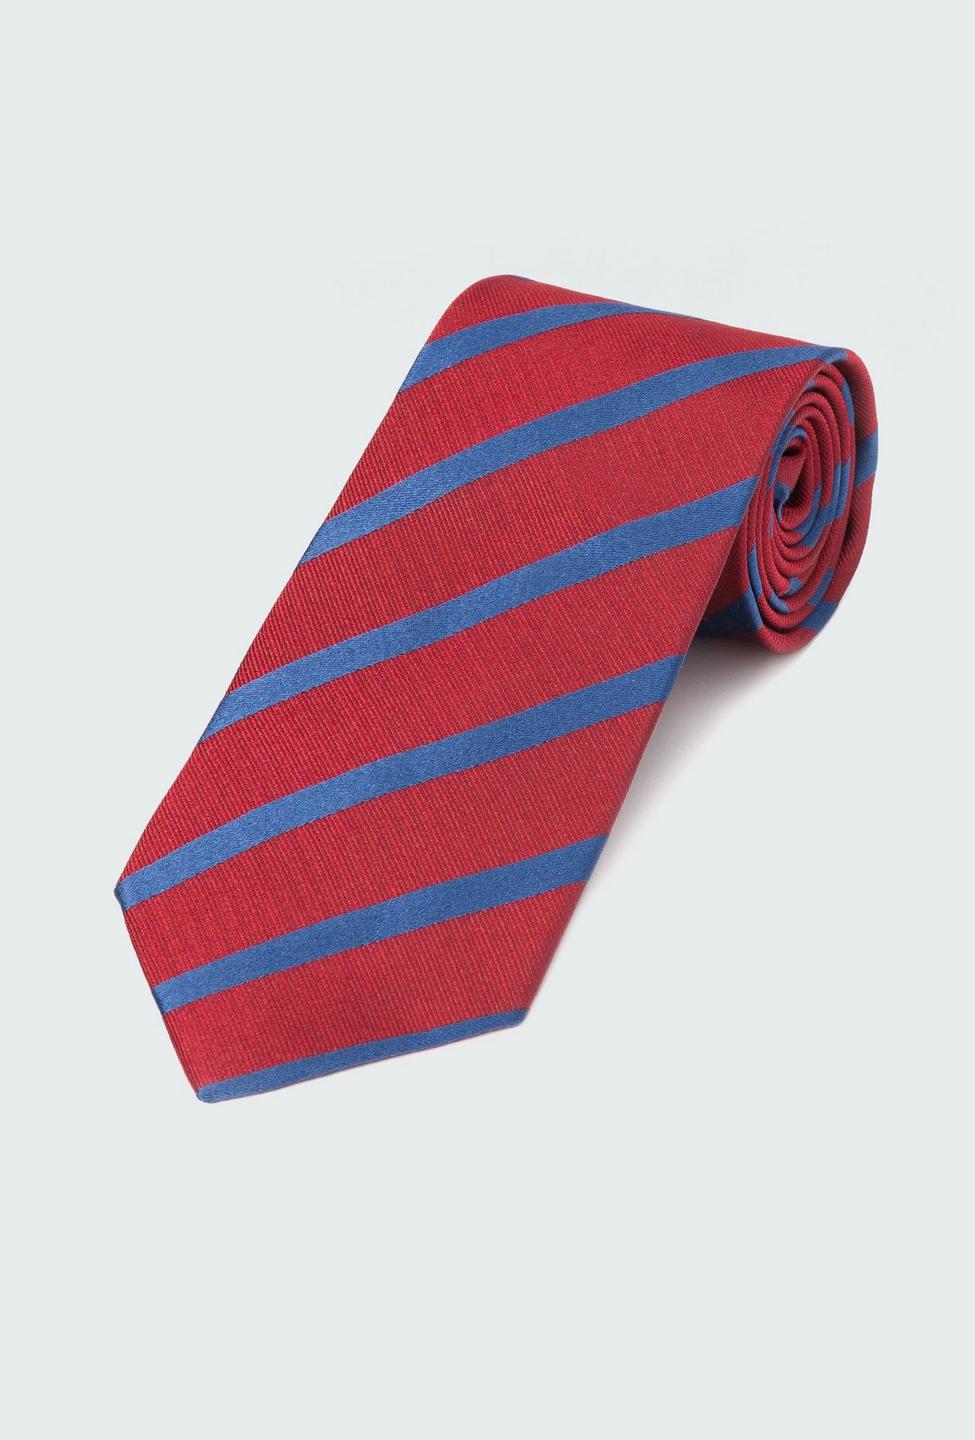 Red tie - Striped Design from Indochino Collection